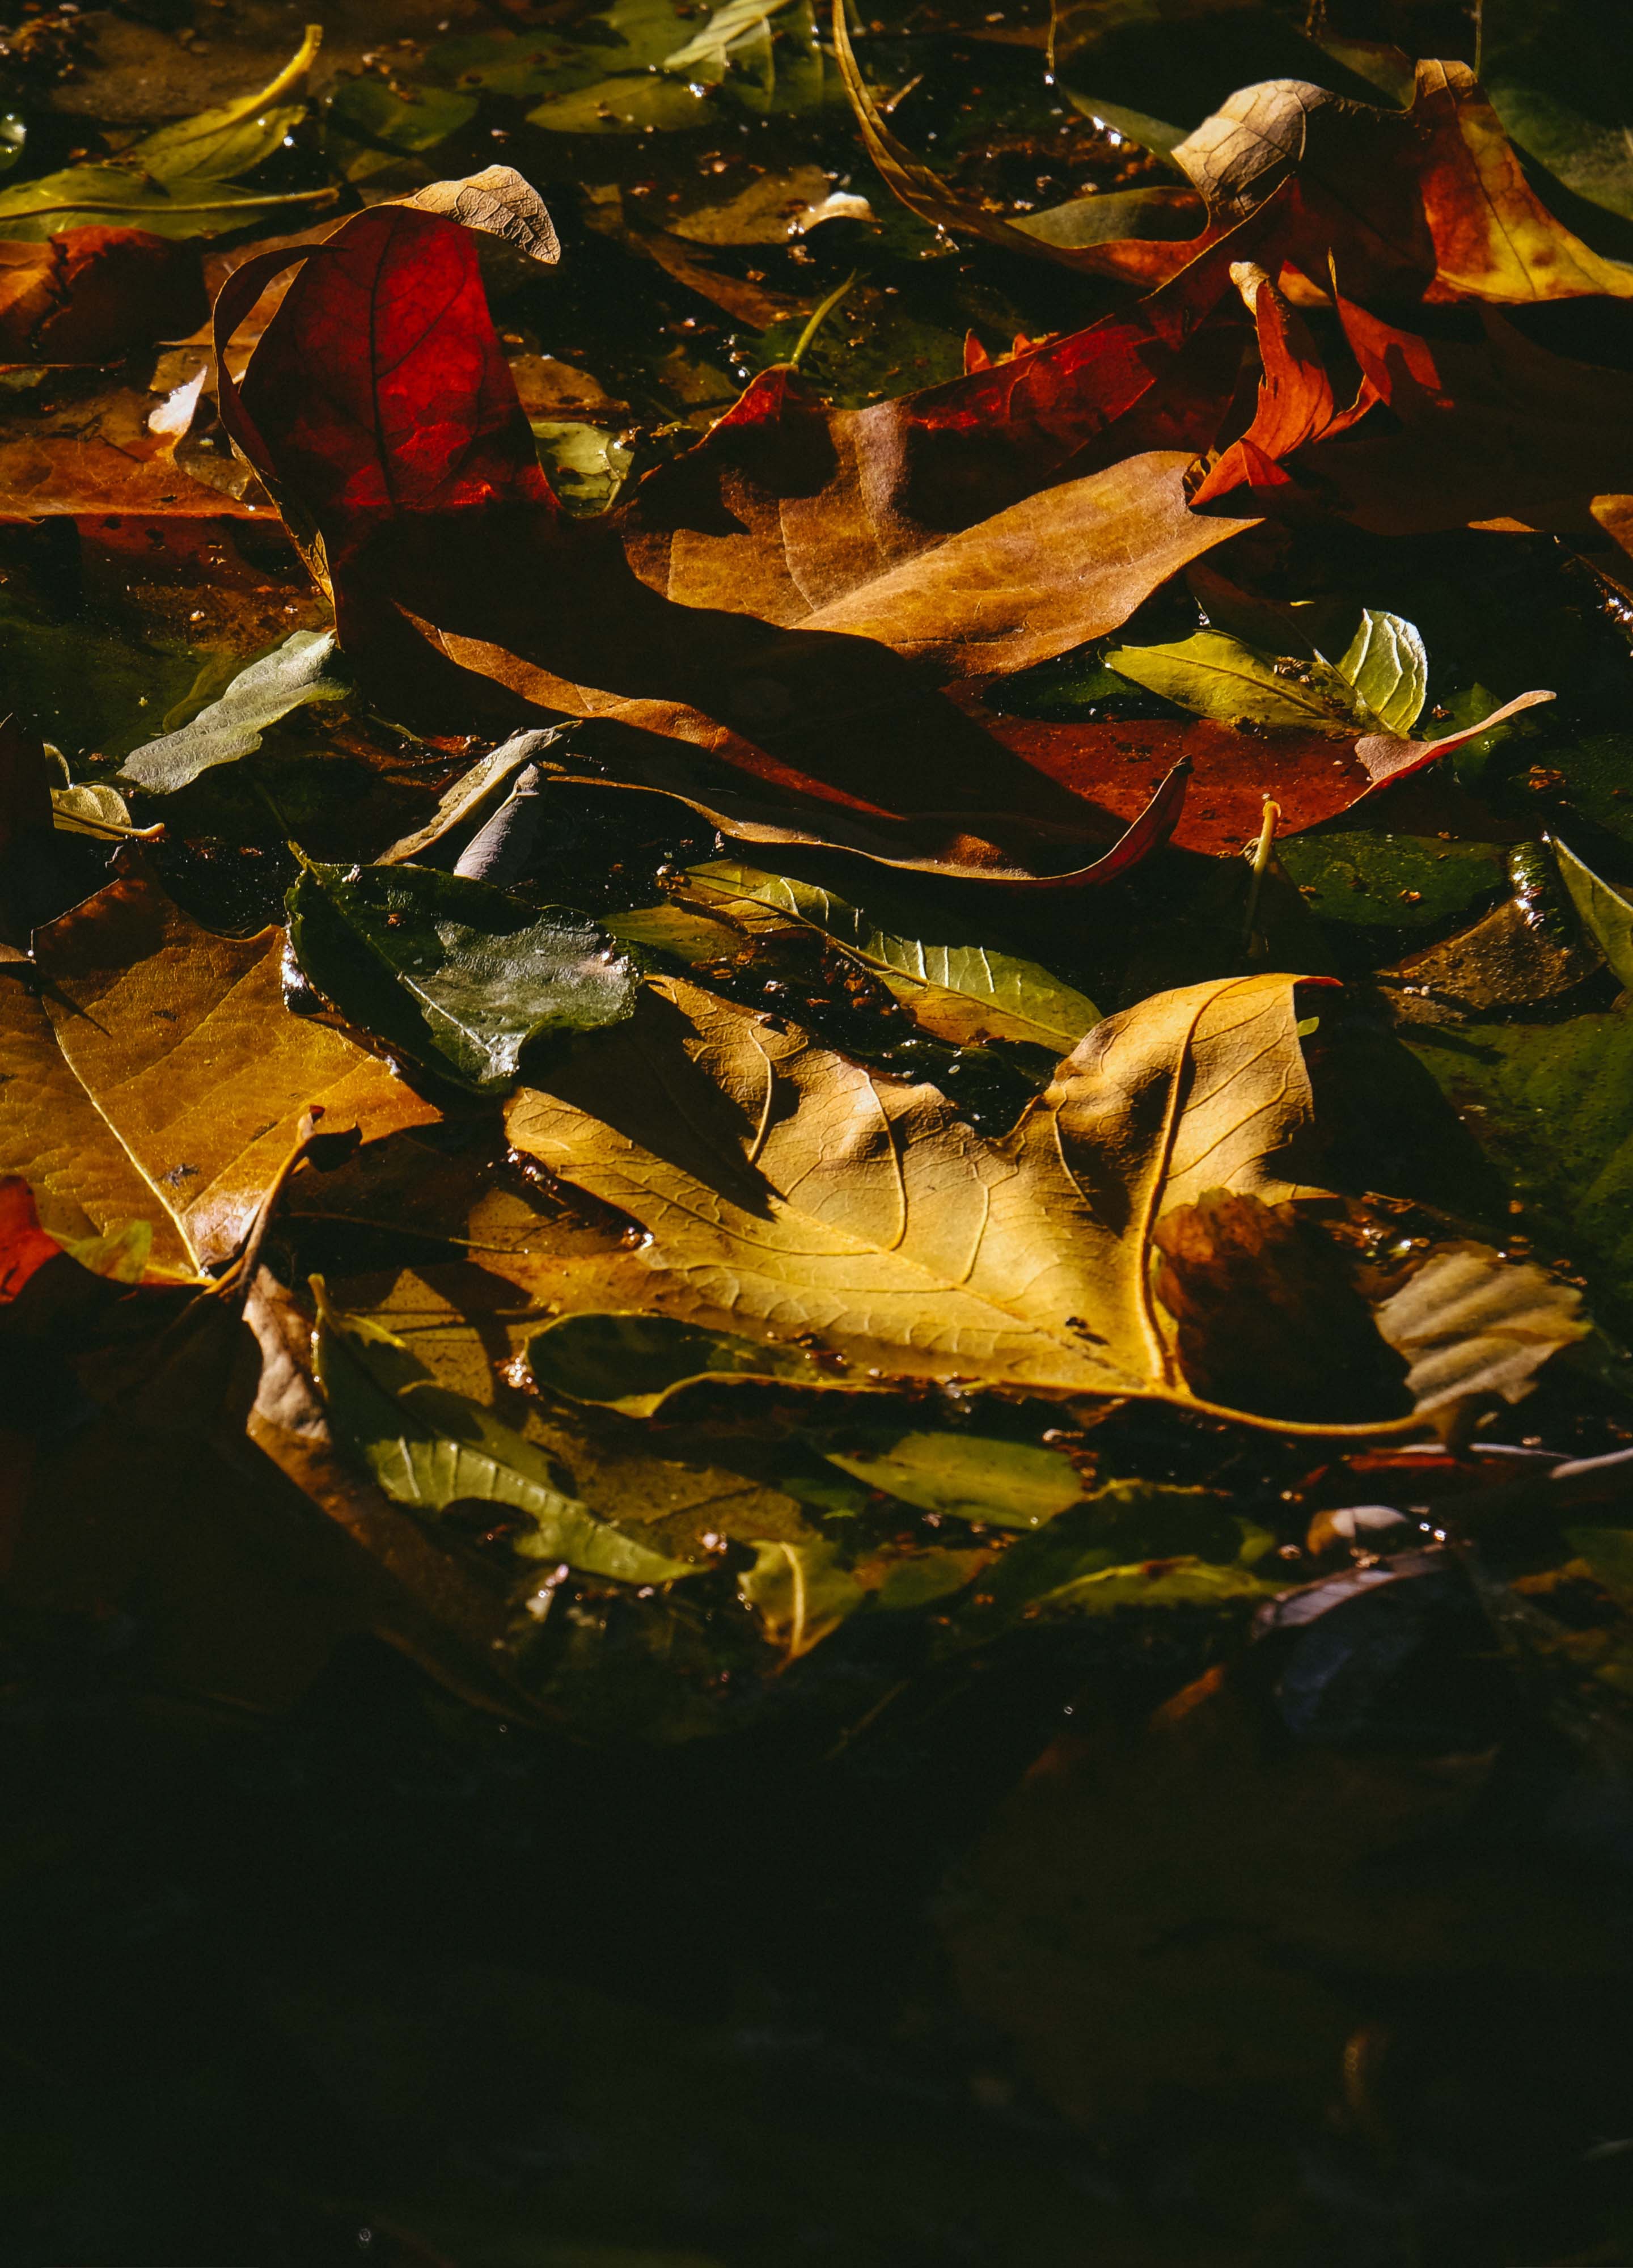 119956 Screensavers and Wallpapers Fallen for phone. Download nature, autumn, leaves, dark, wet, fallen pictures for free